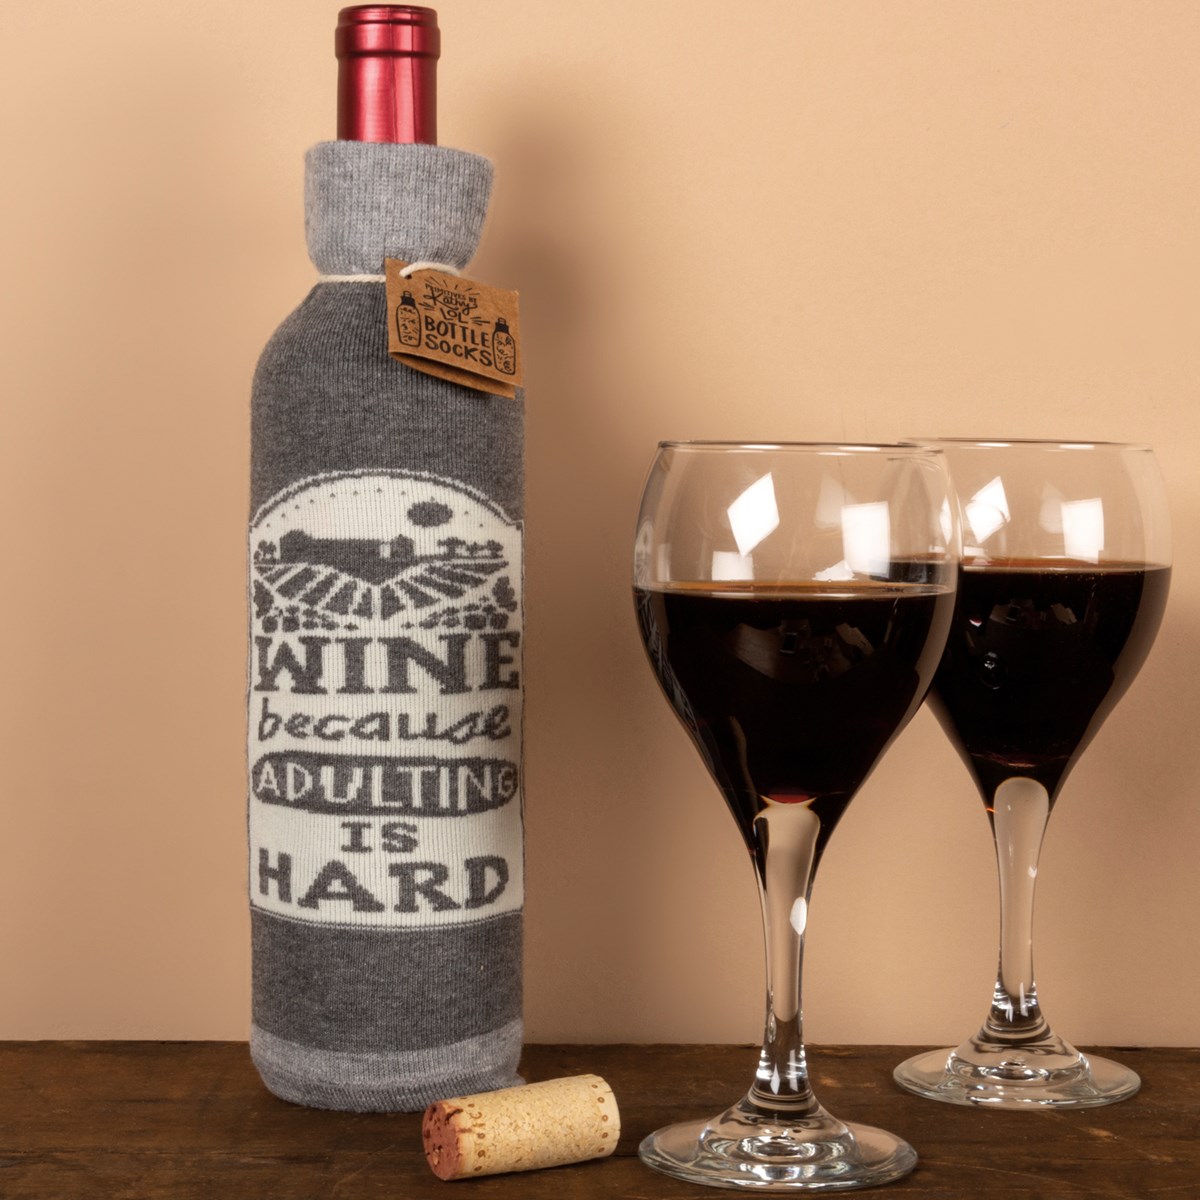 Wine Because Adulting Is Hard Bottle Sock - Cotton, Nylon, Spandex